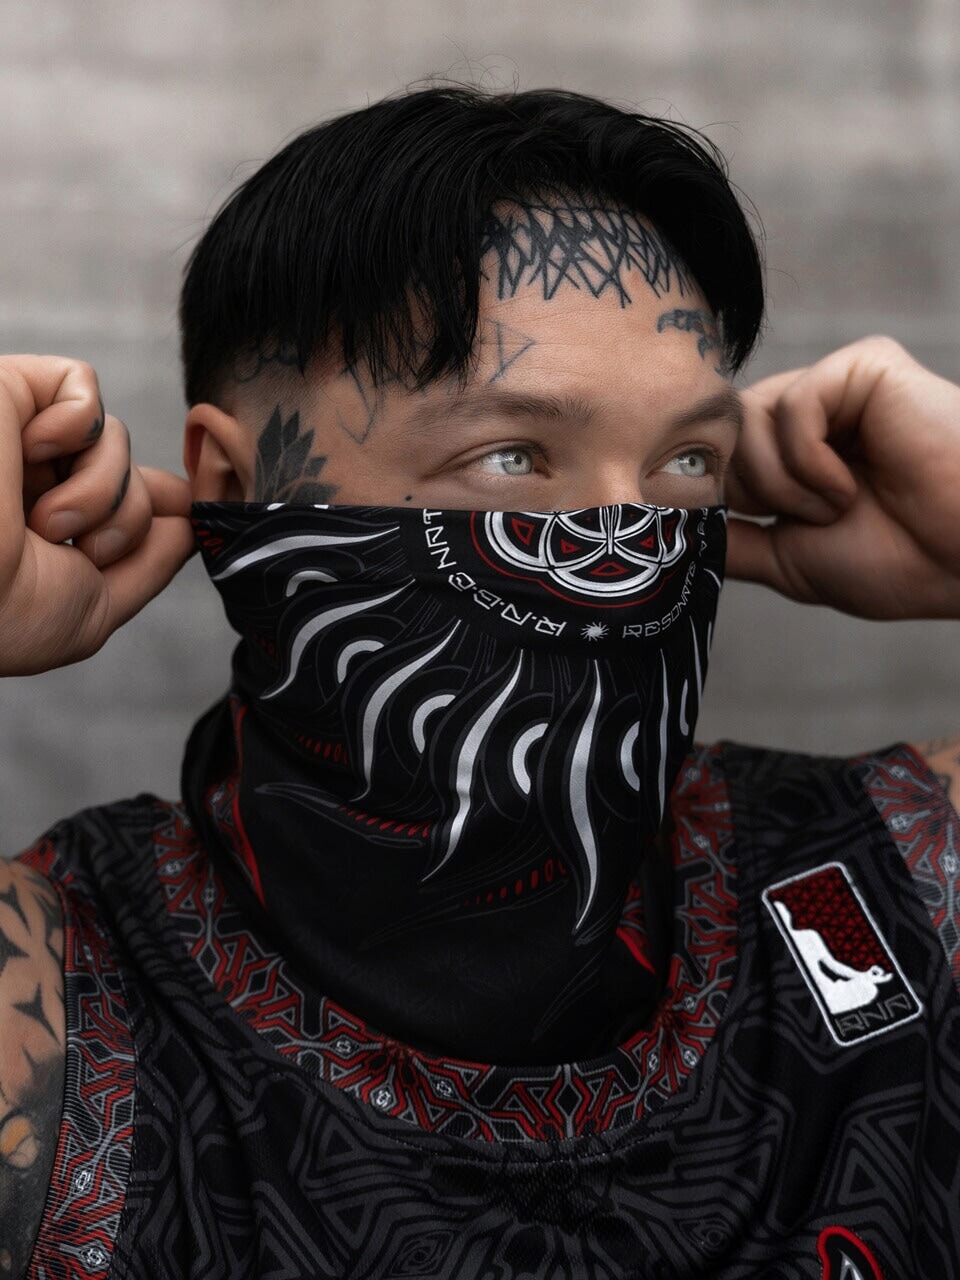 PRE-ORDER ✦ PROTECTED BY INTENT ✦ Crimson Double-sided Bandana Coming Soon 